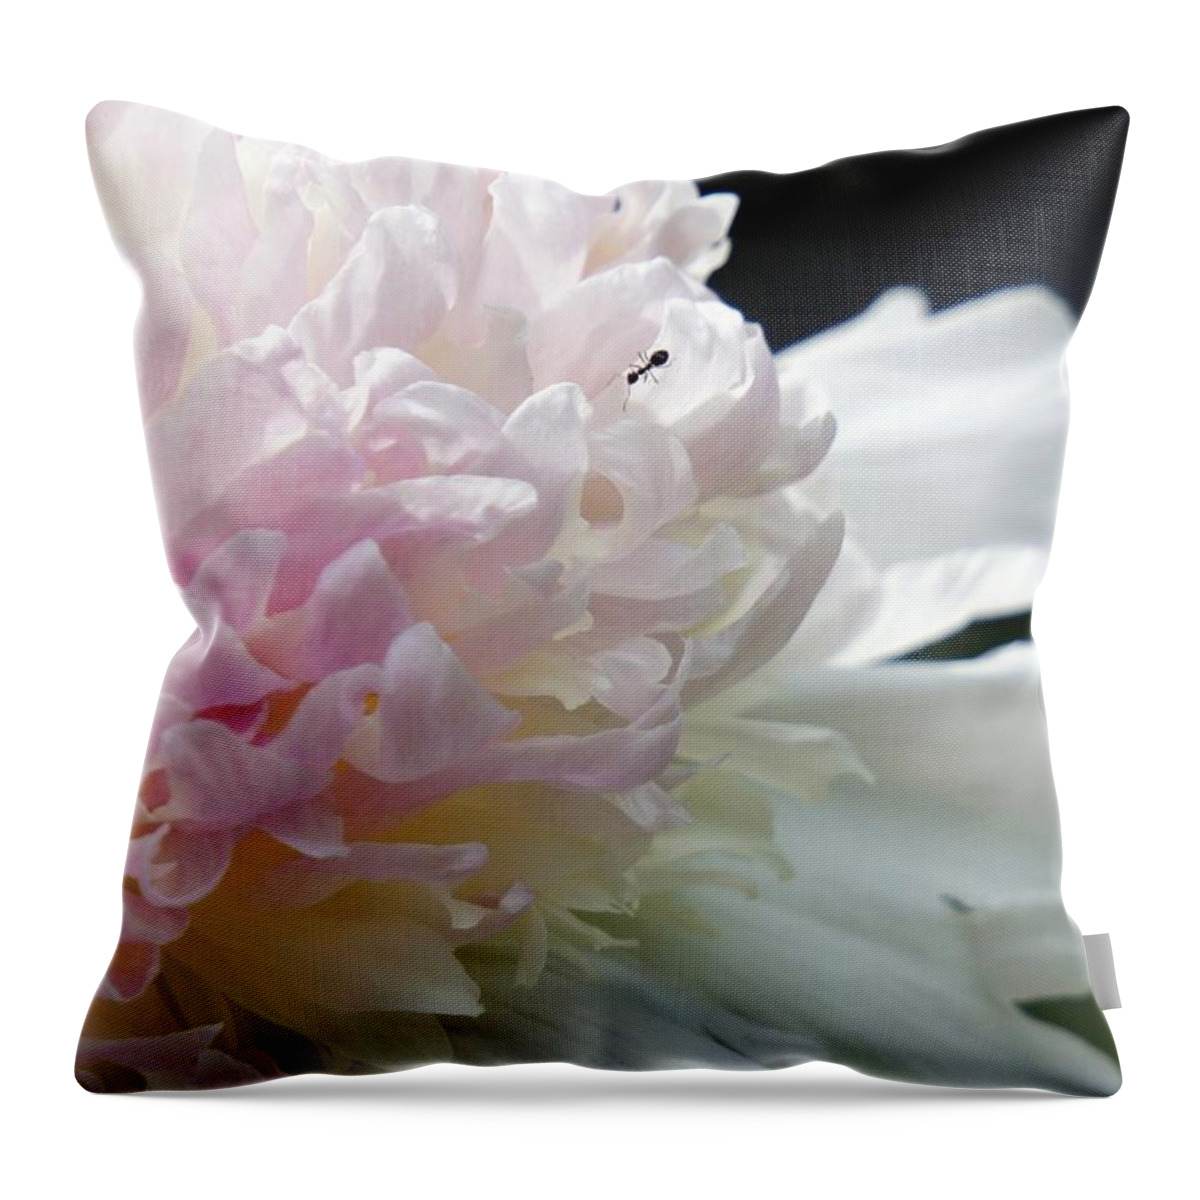 Blush Throw Pillow featuring the photograph Blushing Peony by Lilliana Mendez